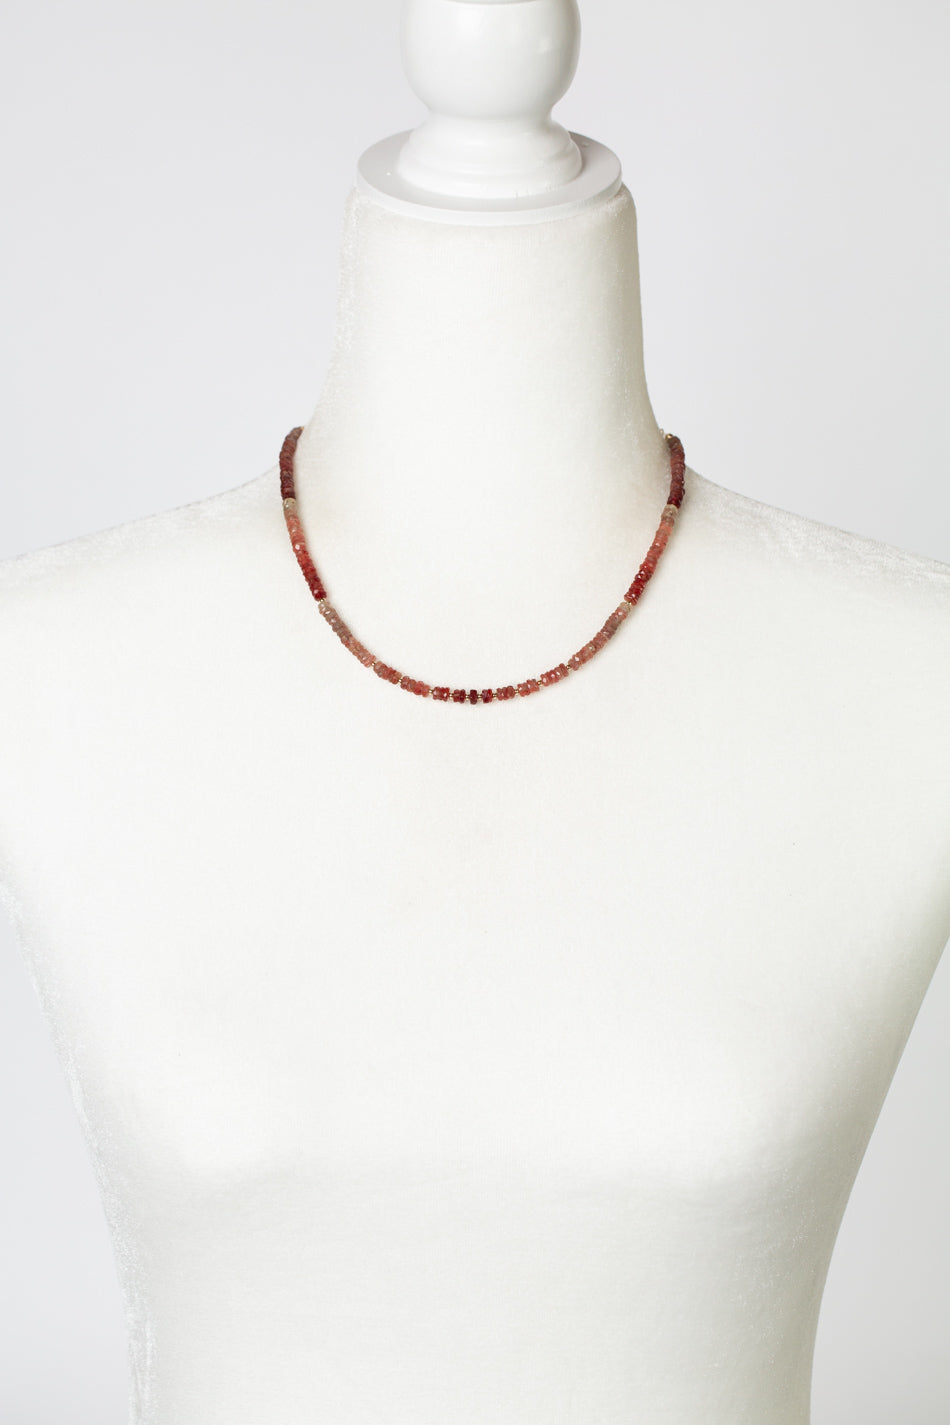 Divinity 16.5-18.5" Ombre Faceted Andesine Simple Necklace